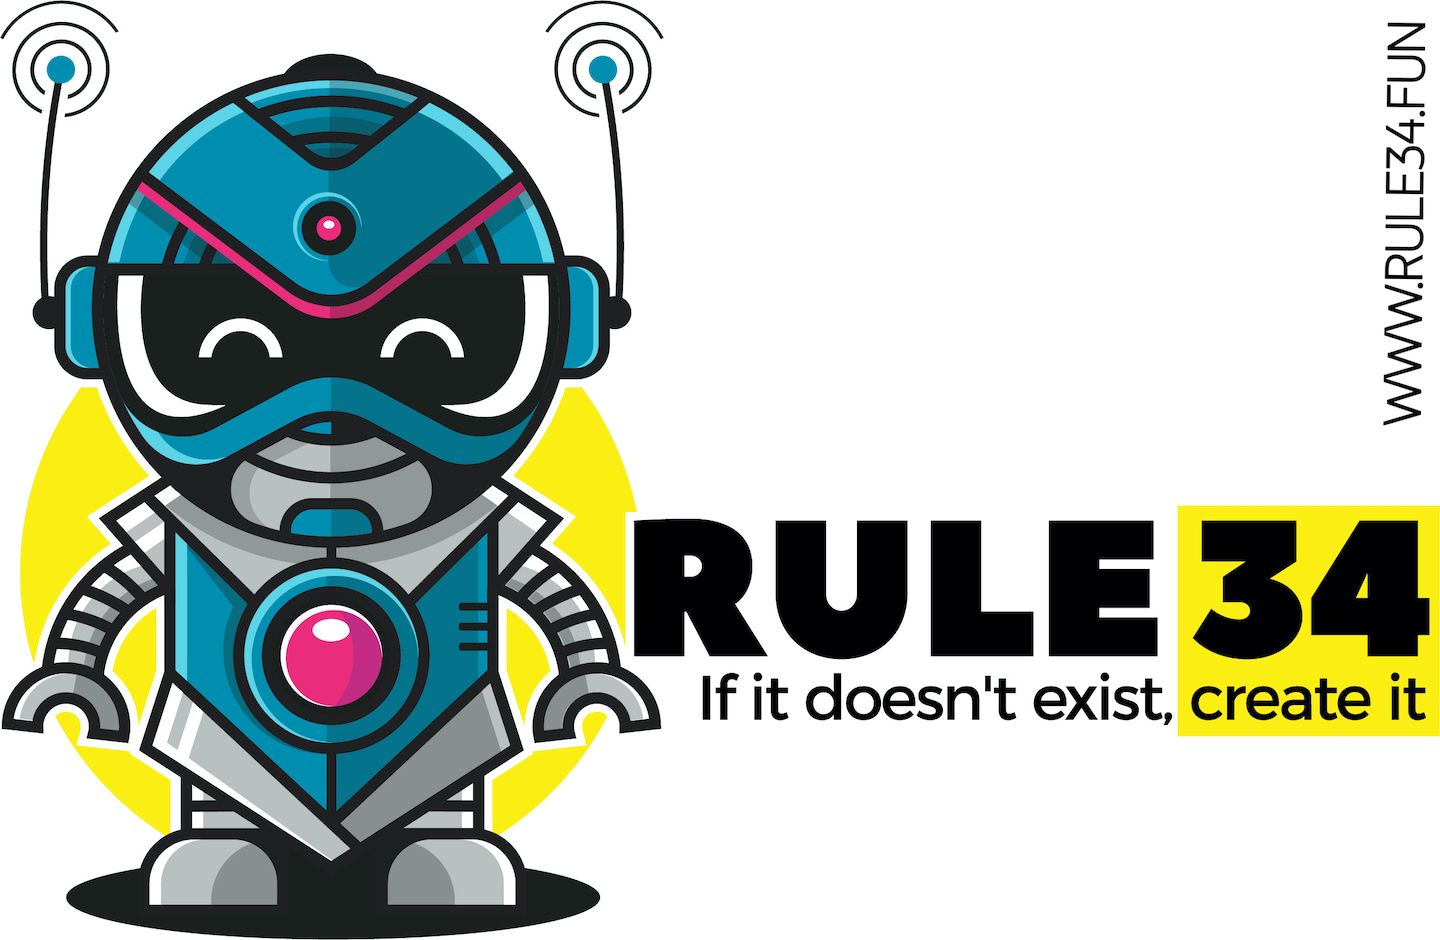 Rule 34 Web App Launches; Allows Users to Create Their Own Image-Boards,  Share Images and Post Comments Anonymously in Realtime - PR.com